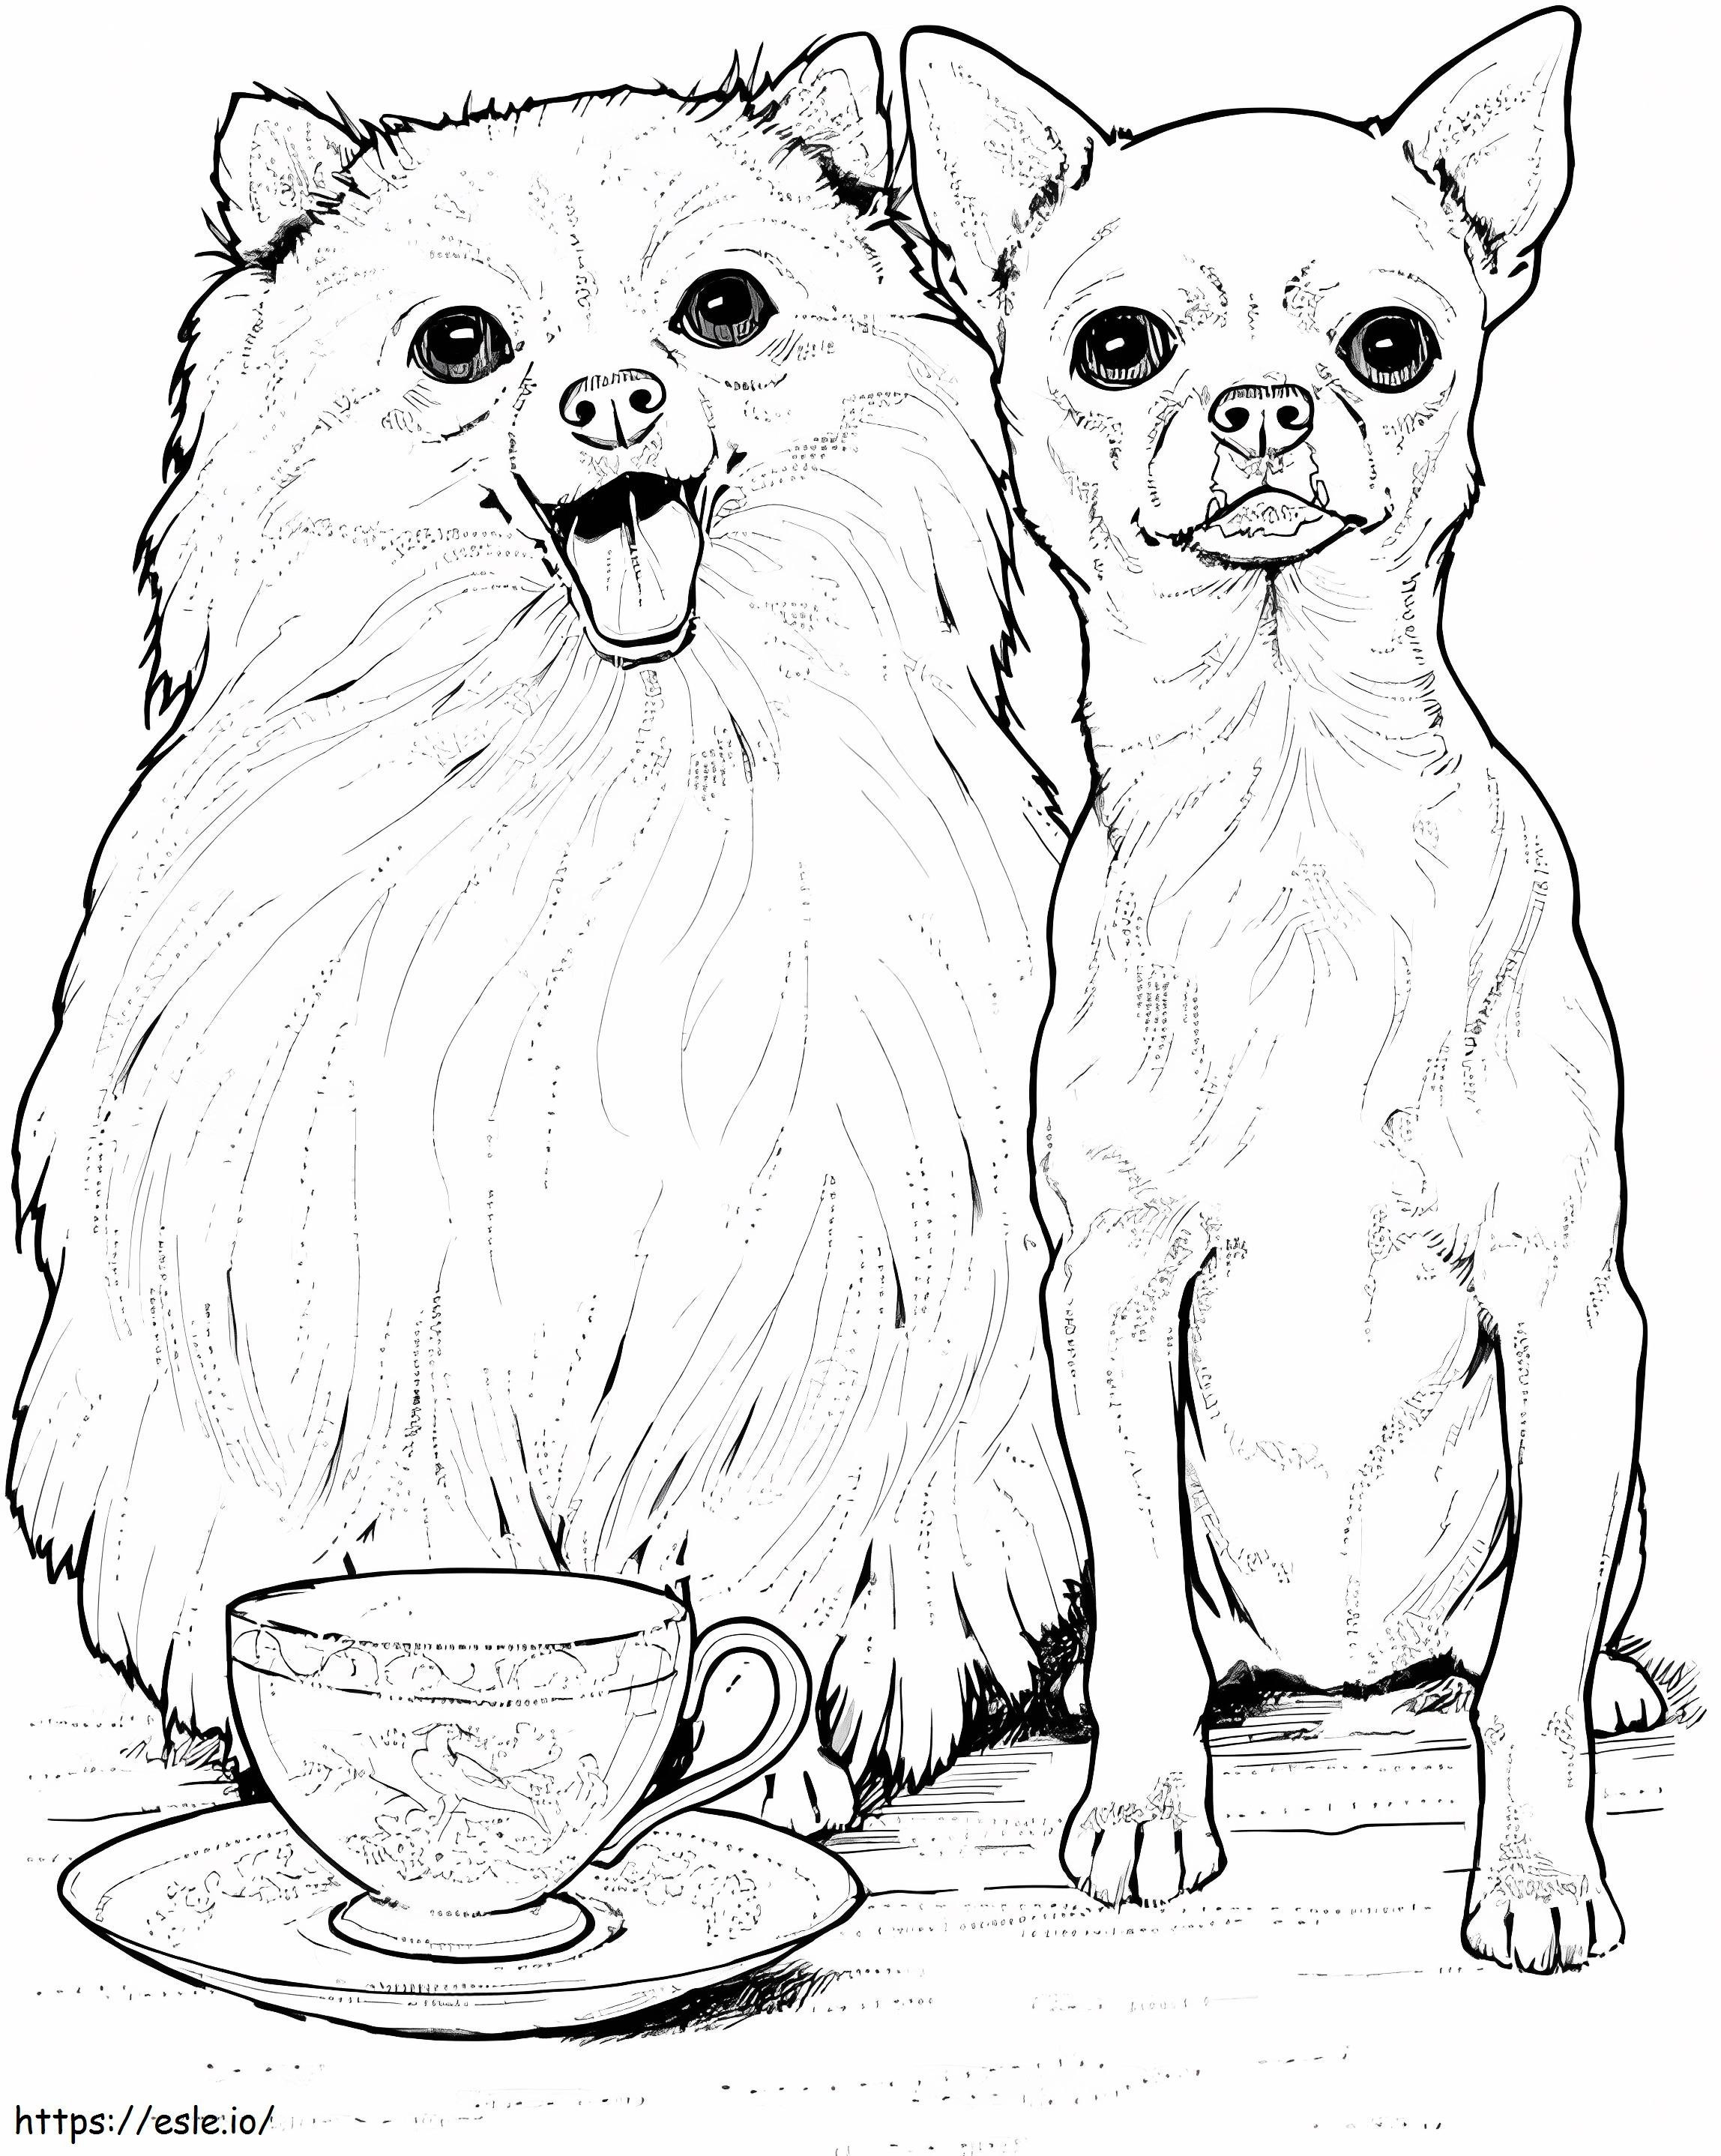 Pomeranian And Chihuahua coloring page